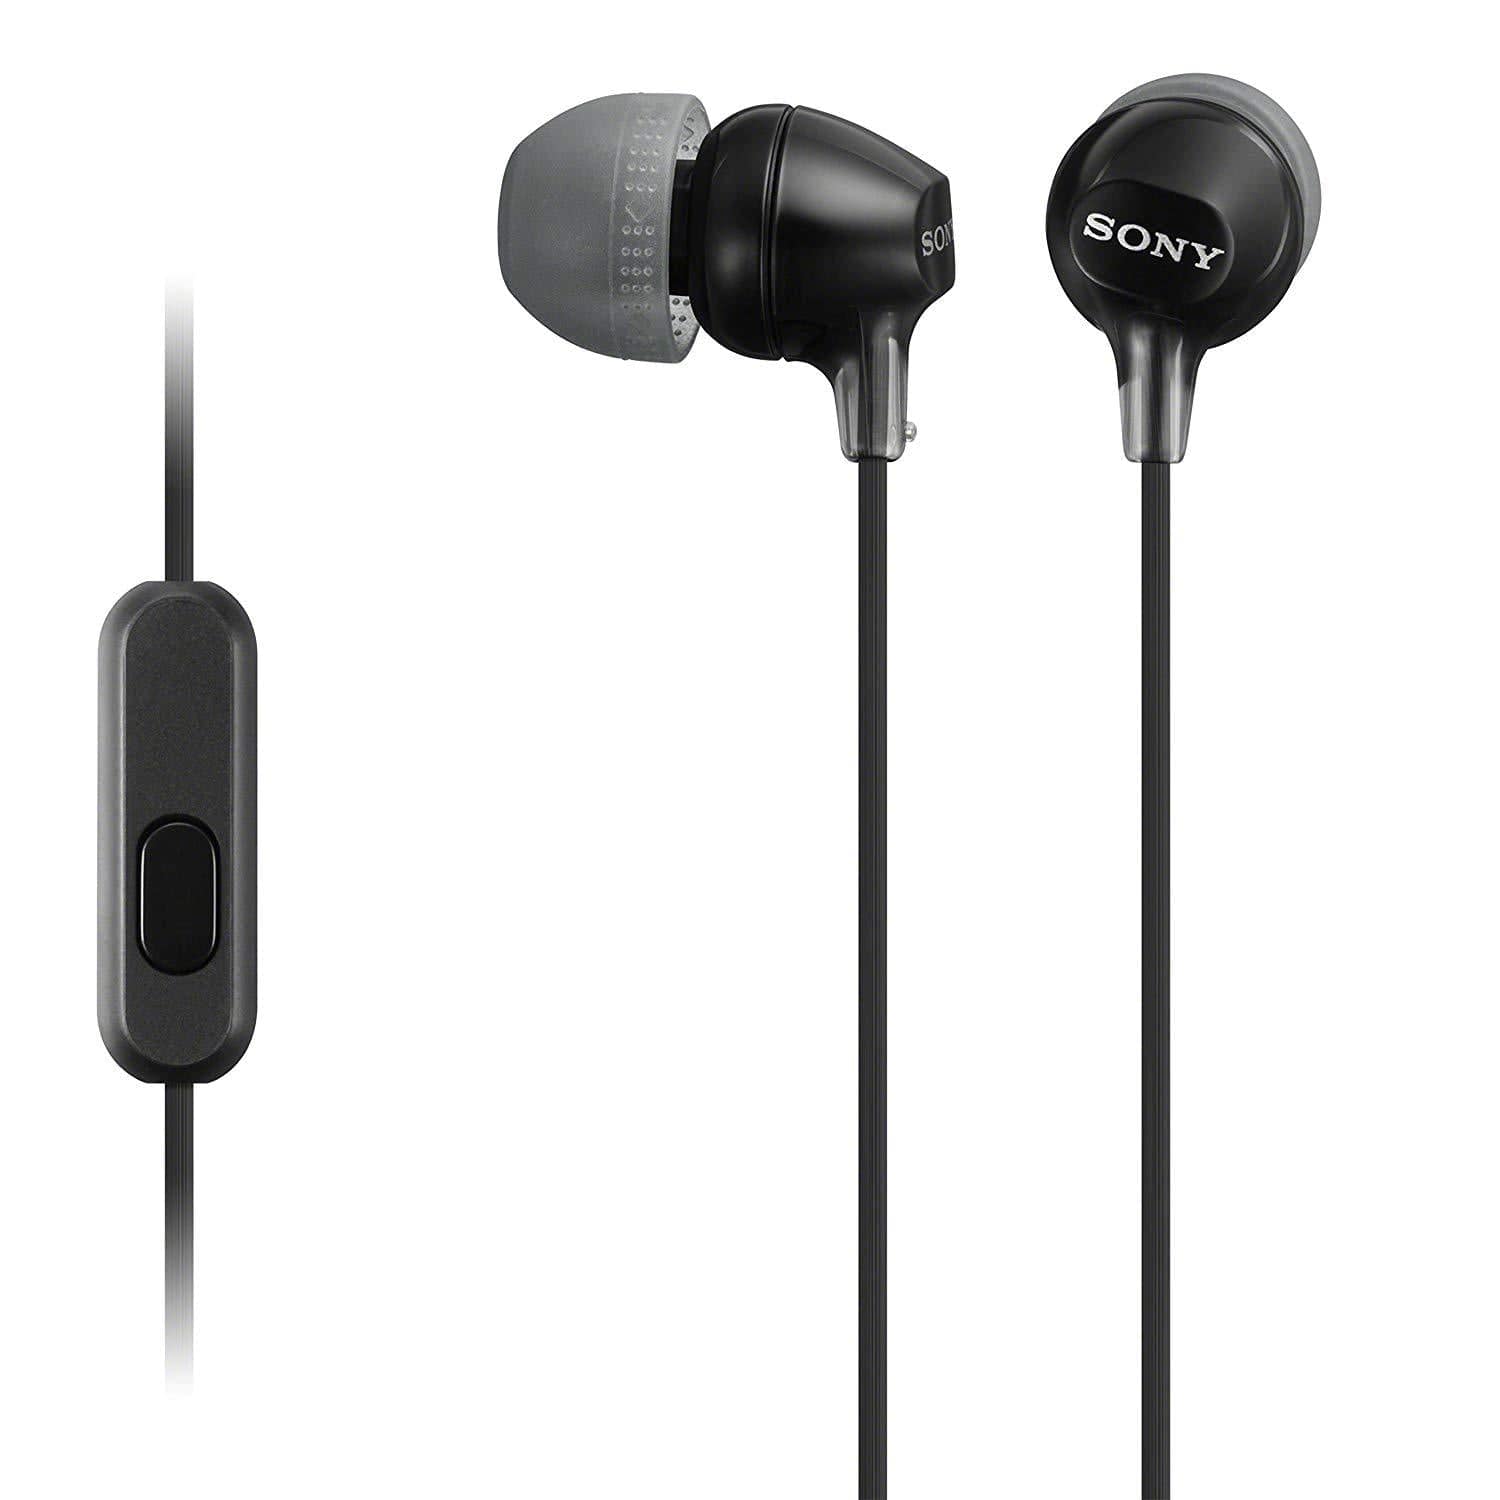 Sony MDR-EX15AP Earphones with Smartphone Mic and Control - Black [Accessories]